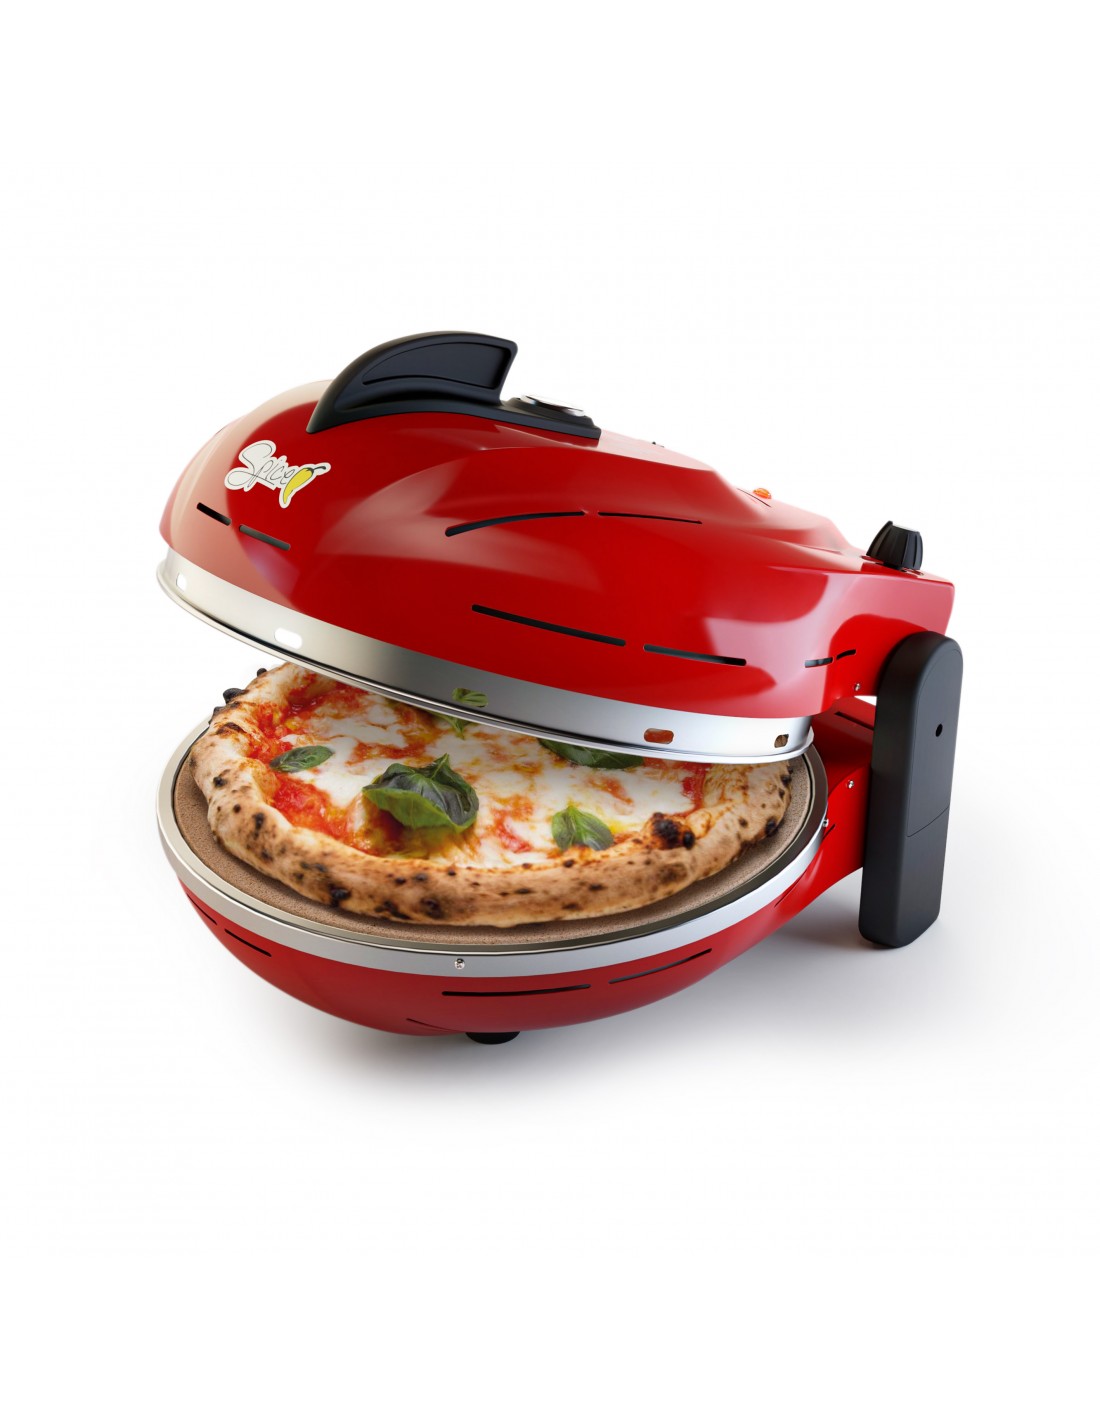 Spice Diavola Pro V 2.0 red electric pizza oven - 100% Made in Italy design  and patent